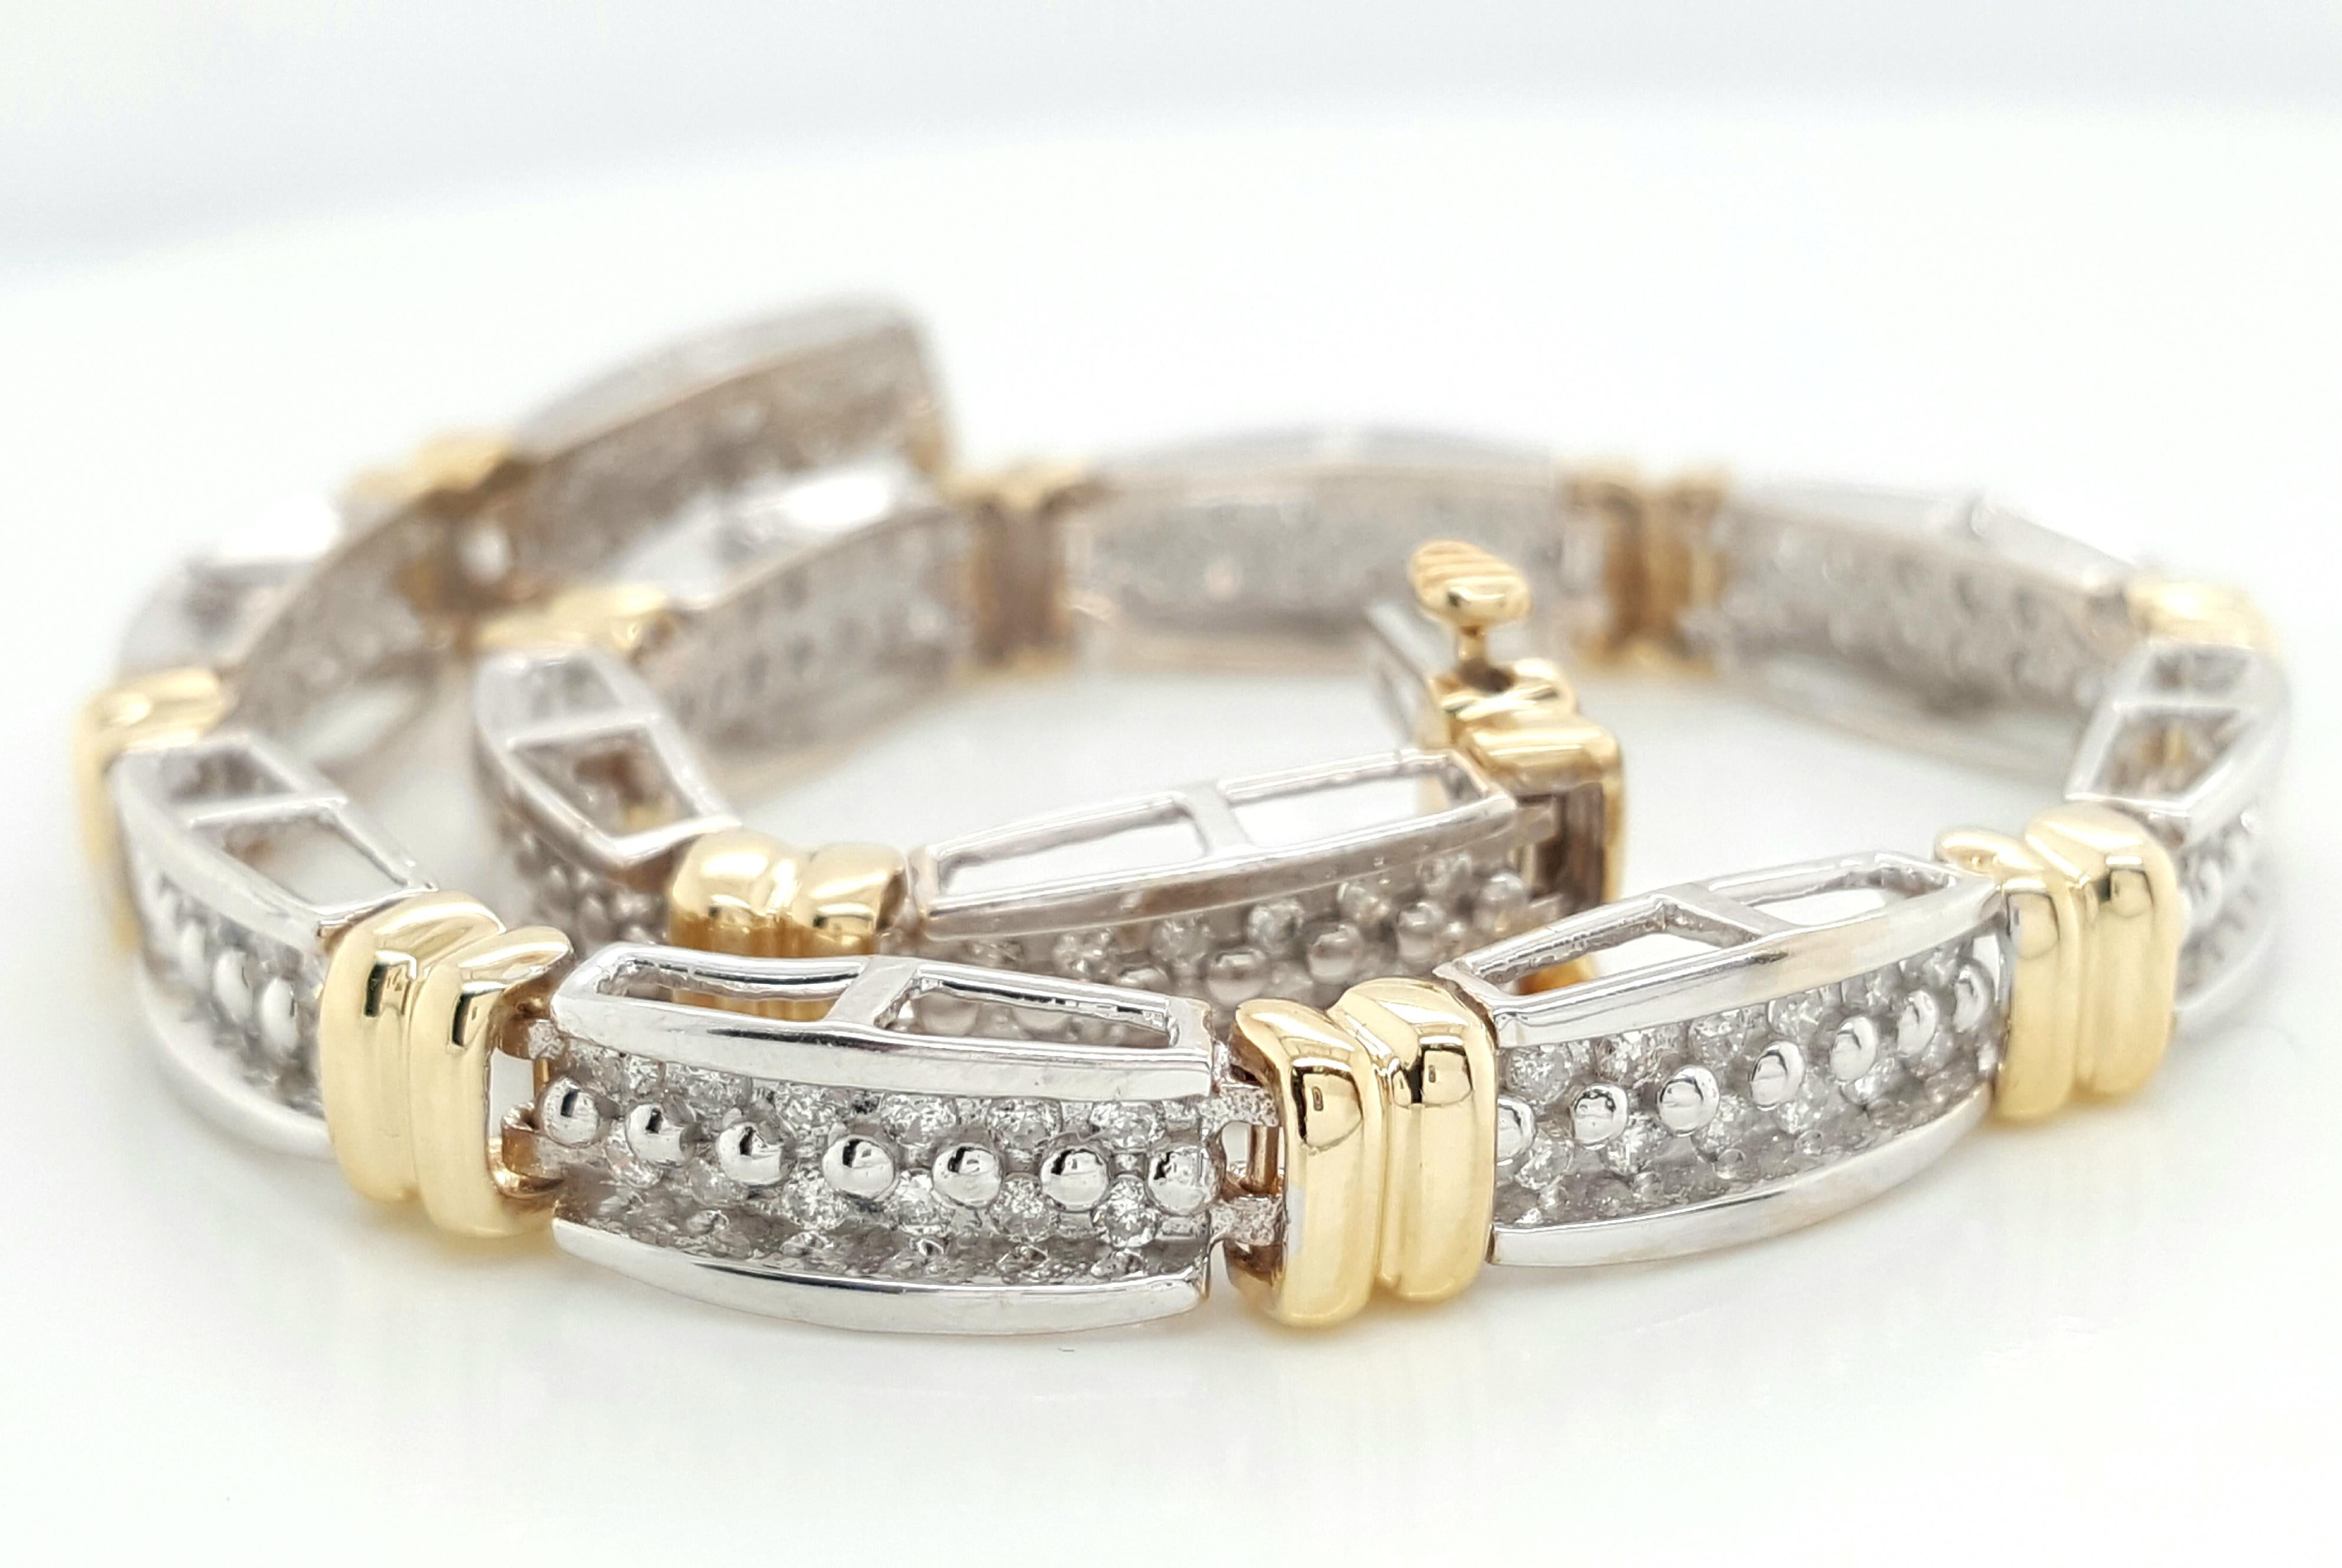 2 Carat Round Cut Diamond 14 Karat Two Tone Gold Bracelet In Good Condition For Sale In Addison, TX